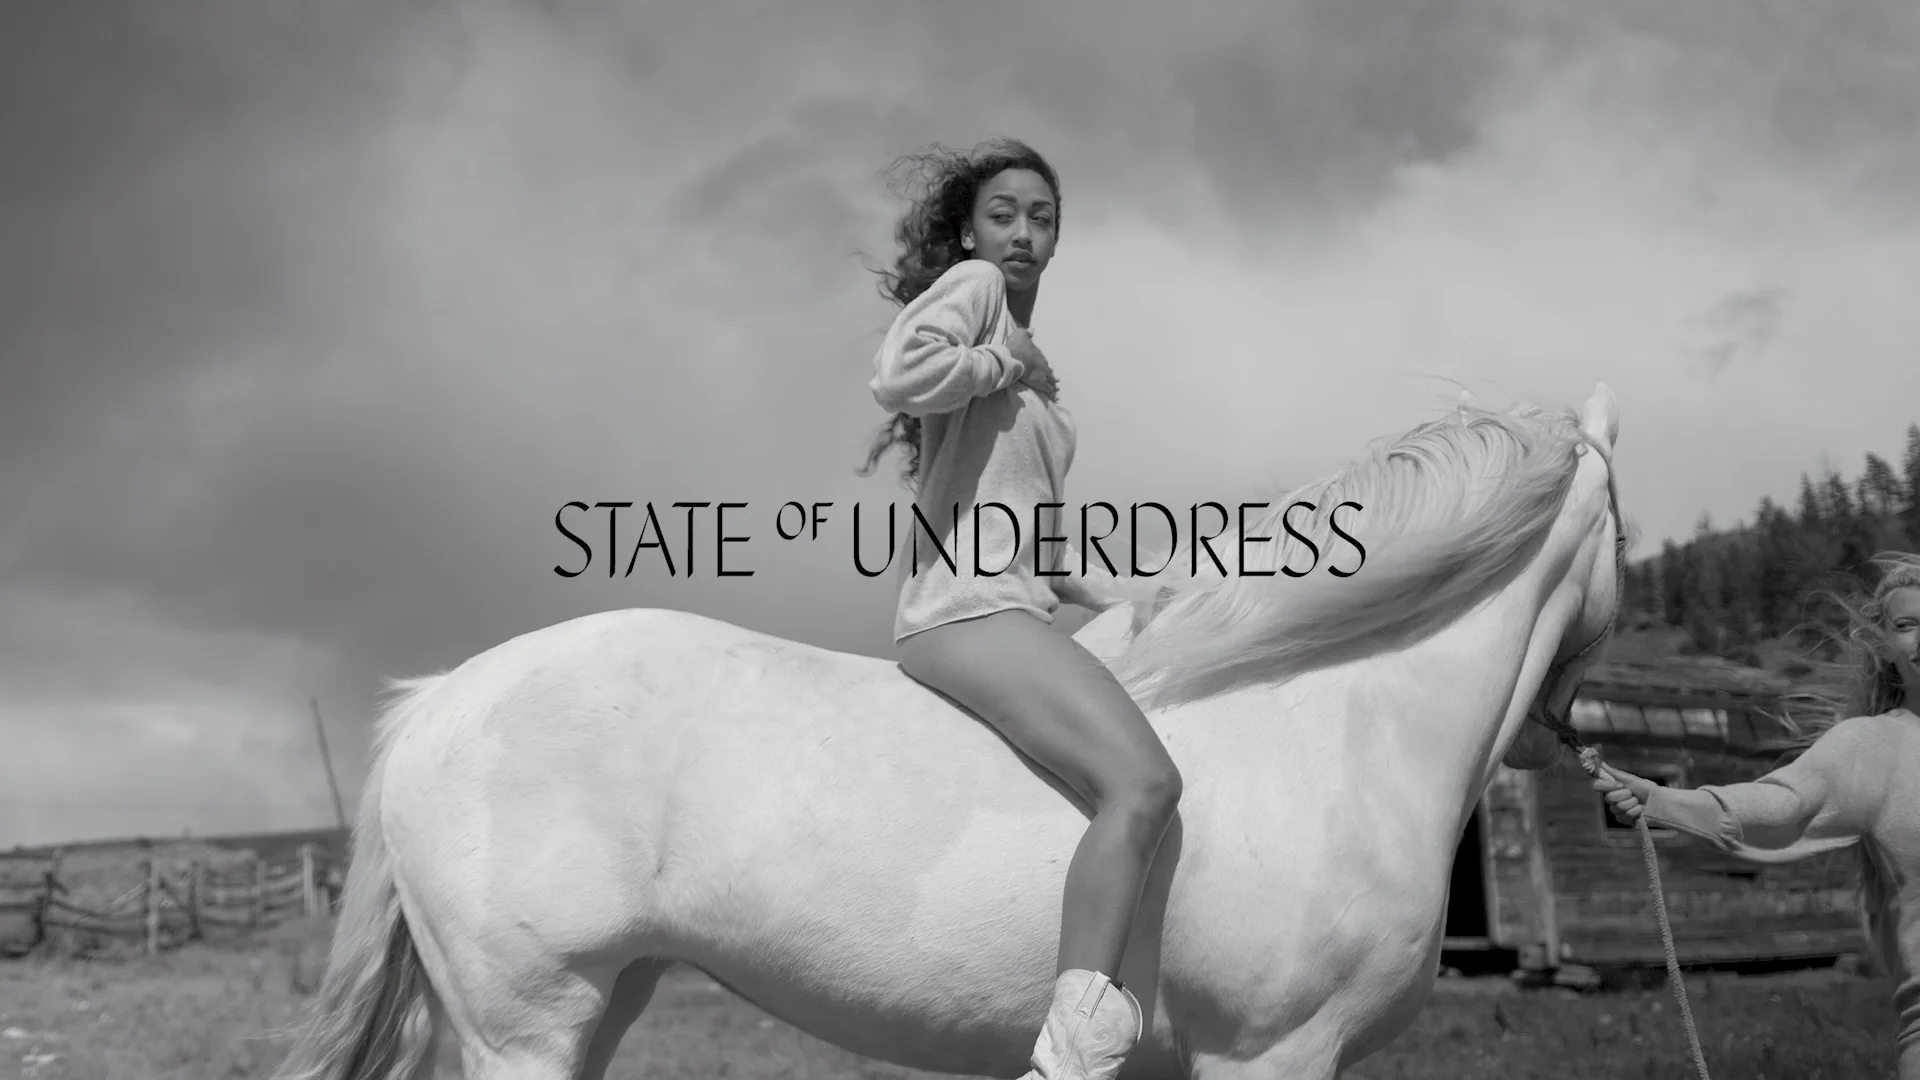 State of Underdress - June 10 2020 on Vimeo